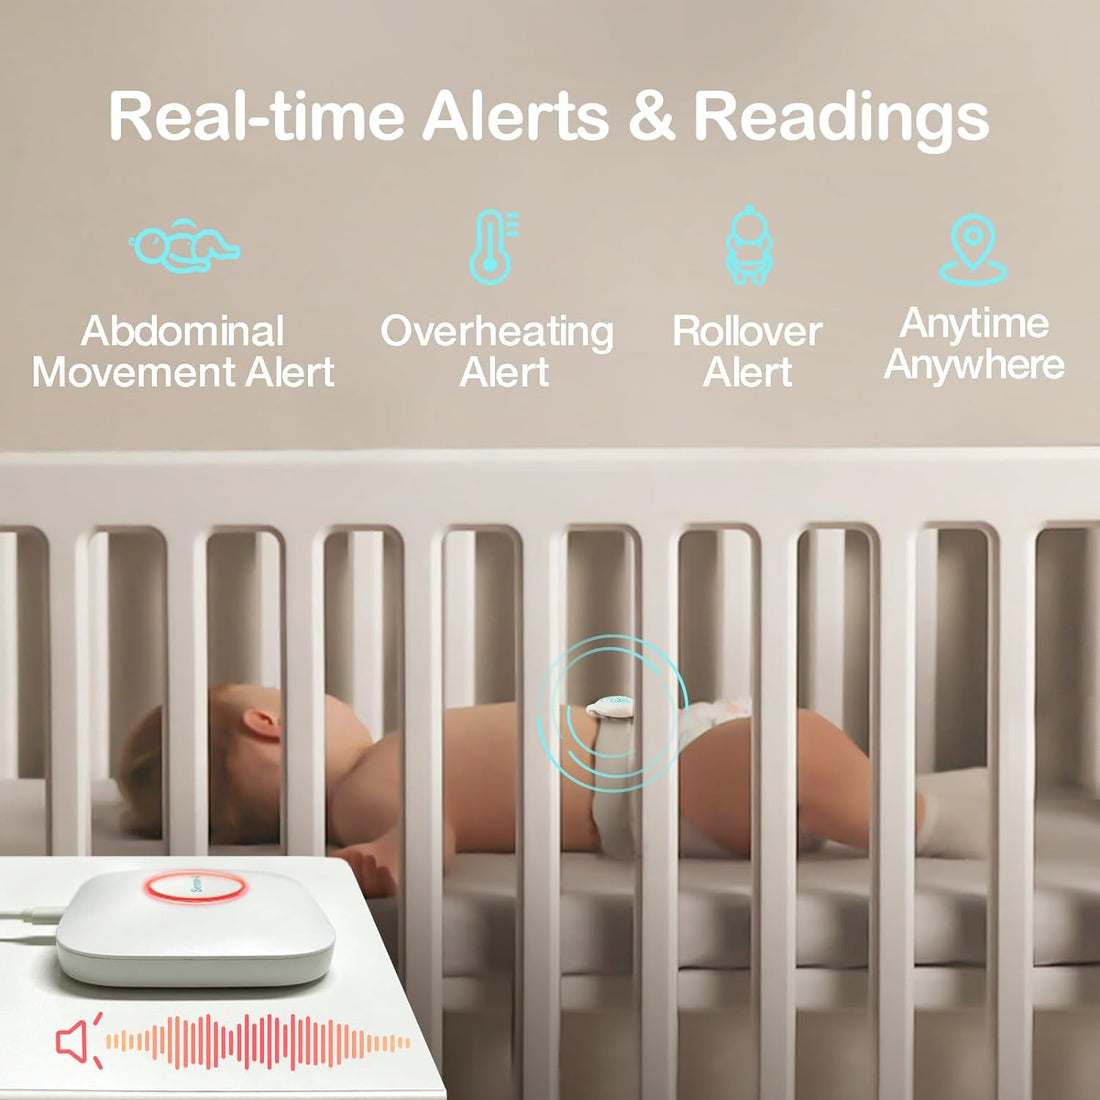 Sense-U Baby Breathing Monitor 3: Monitors Infant Breathing Movement, Rollover, Feeling Temperature and Baby Room’s Temperature, Humidity Level with Real-time Alerts from Anywhere